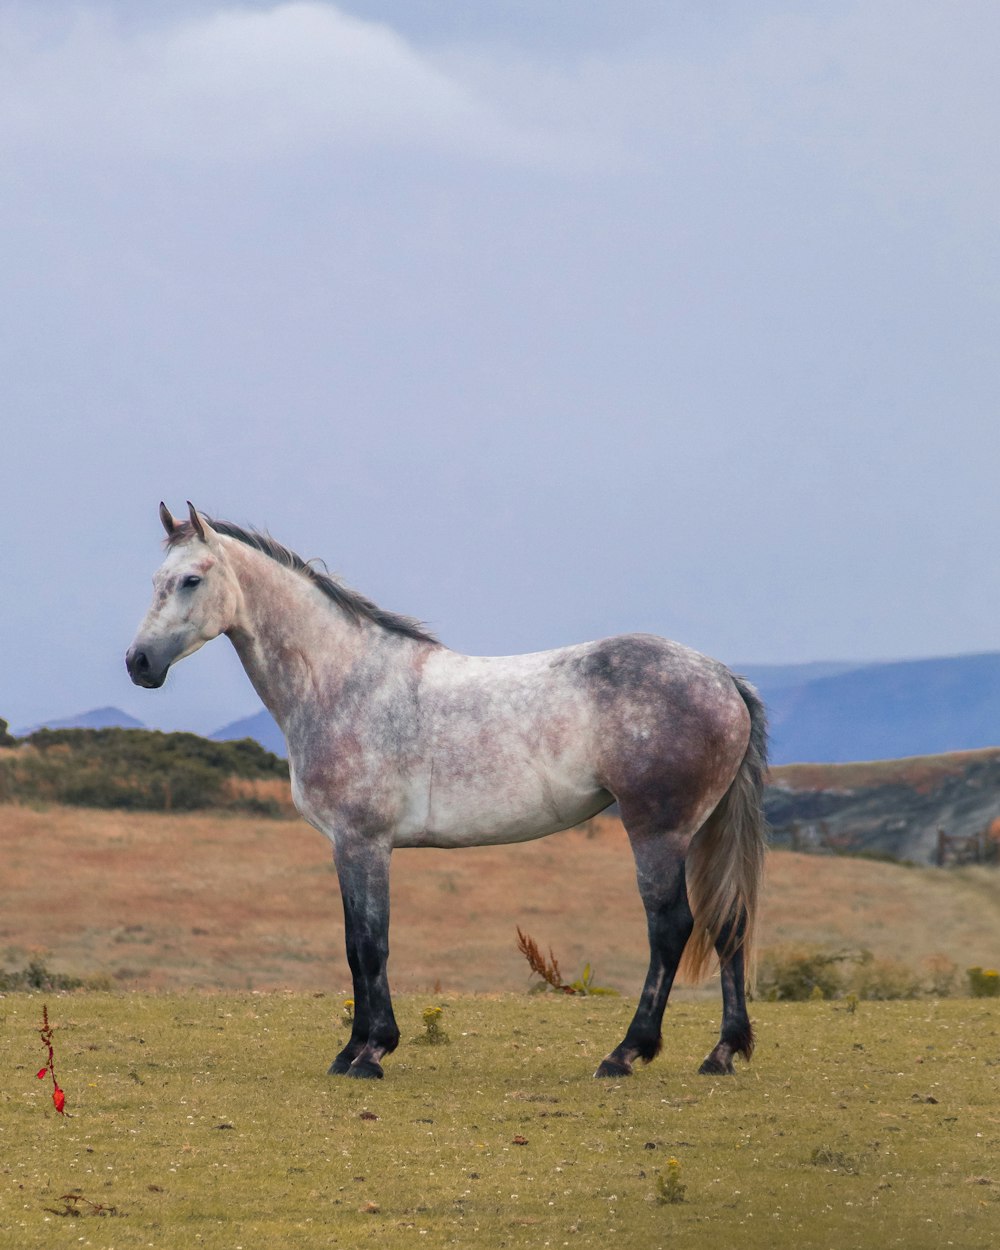 a horse standing in a field with mountains in the background